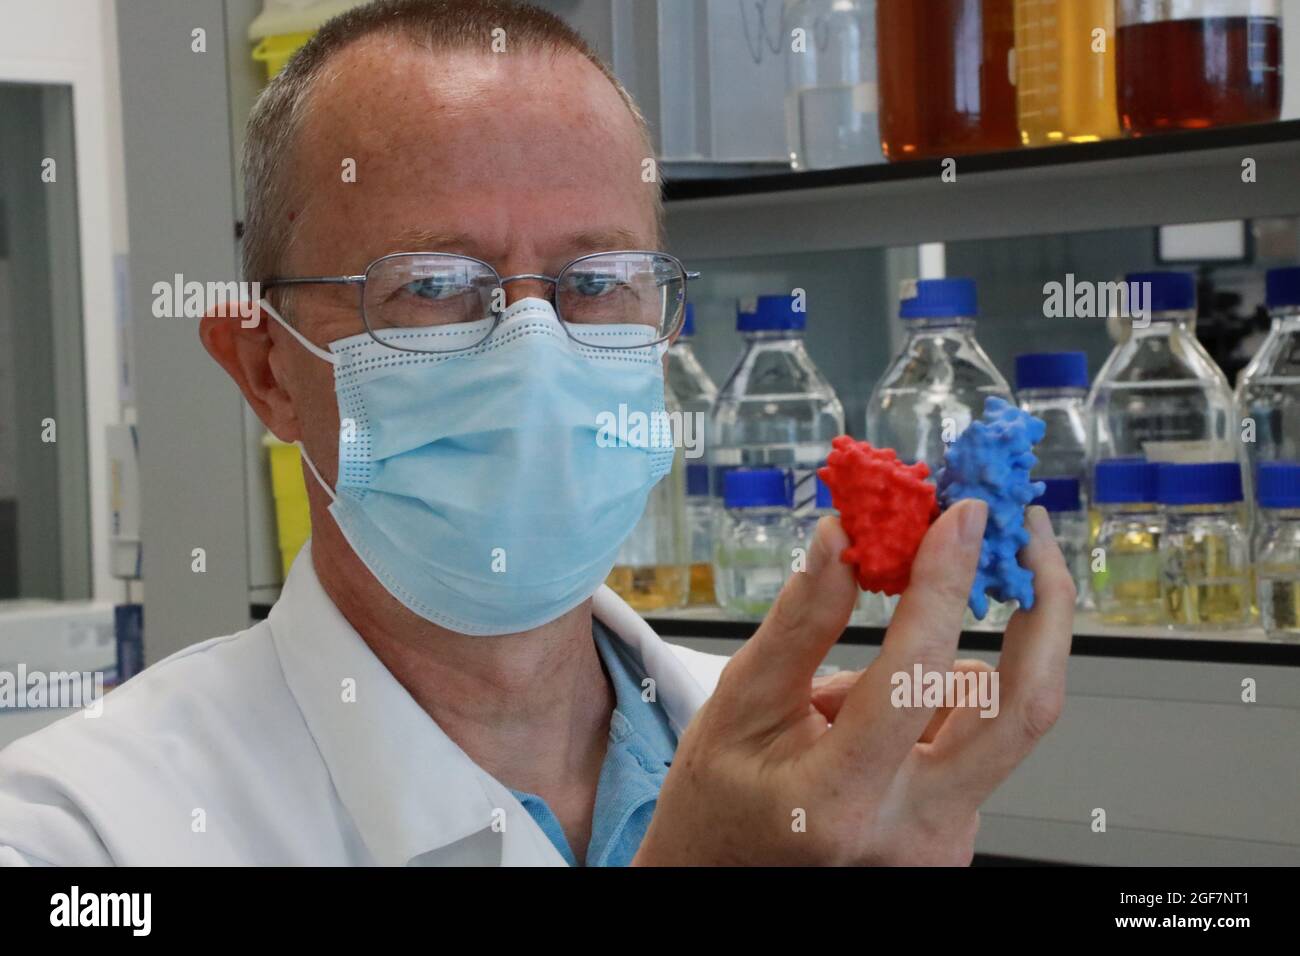 Dr. Xavier Saelens (VIB-UGent Center for Medical Biotechnology group leader) shows an enlarged 3D model of a spike protein (blue) connected to an antibody (red), amid the coronavirus disease (COVID-19) pandemic, in Ghent, Belgium August 23, 2021. REUTERS/ Bart Biesemans Stock Photo